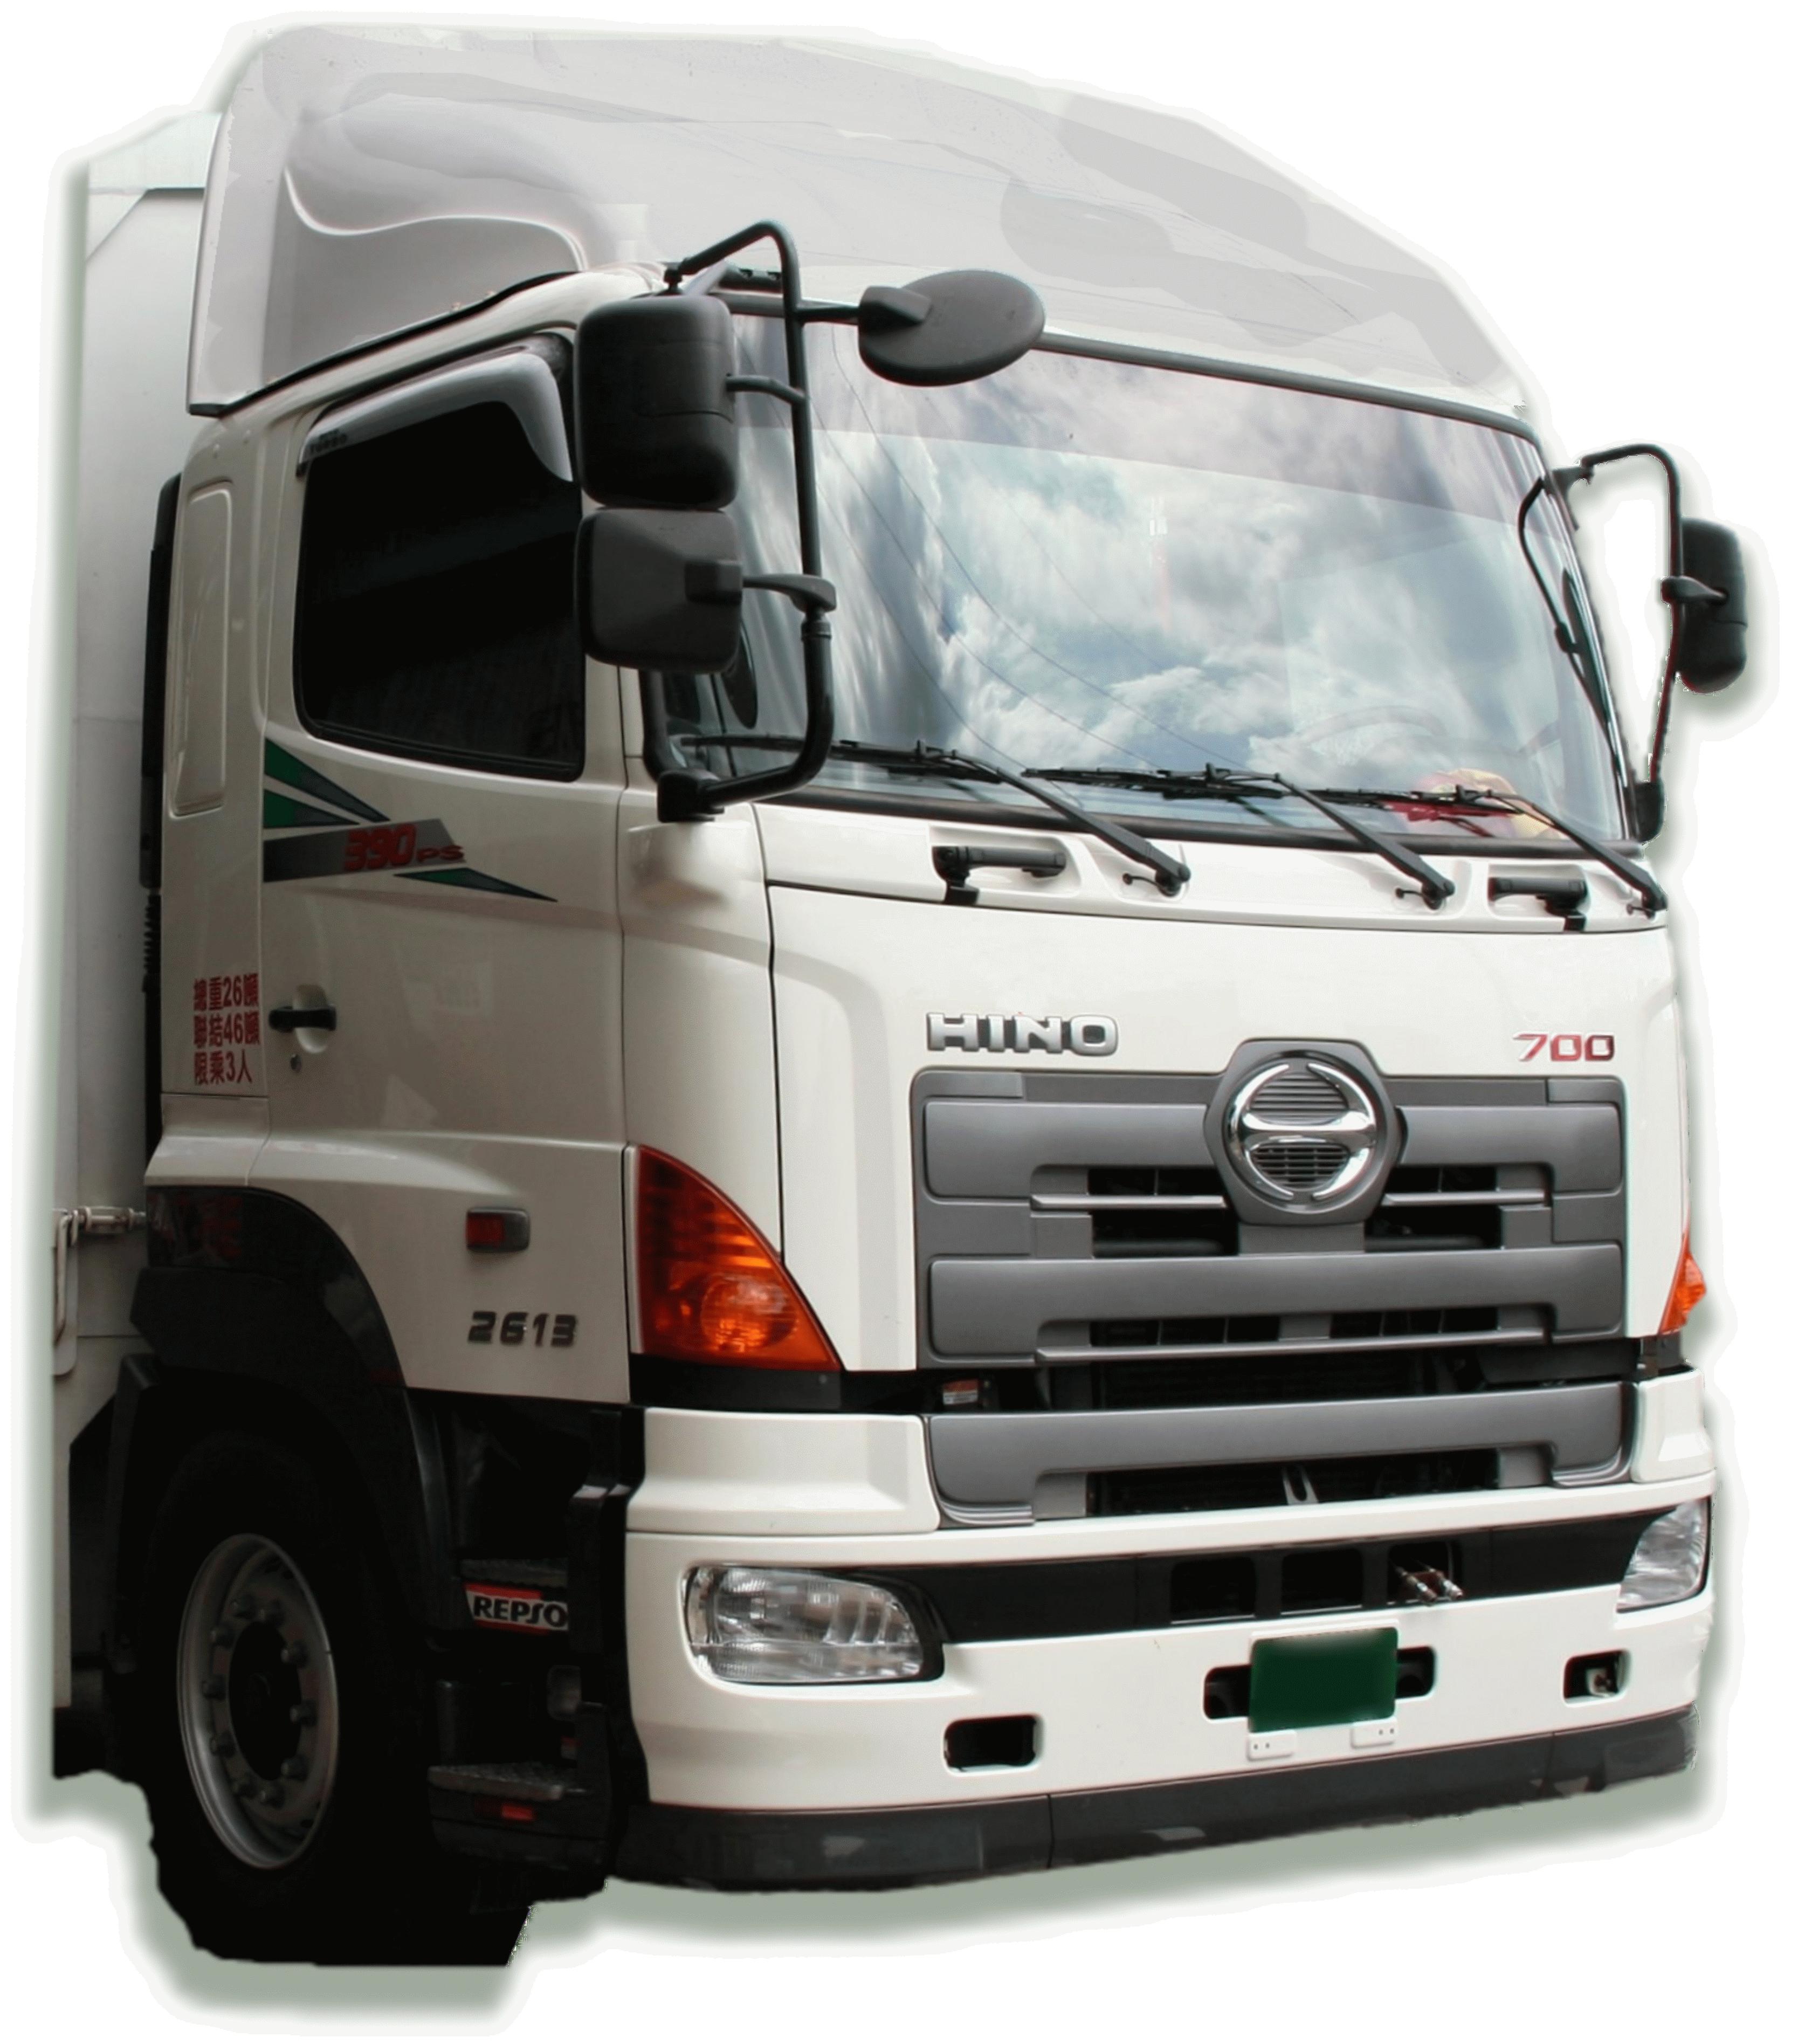 Hino SH. View Download Wallpaper. 3335x3791. Comments